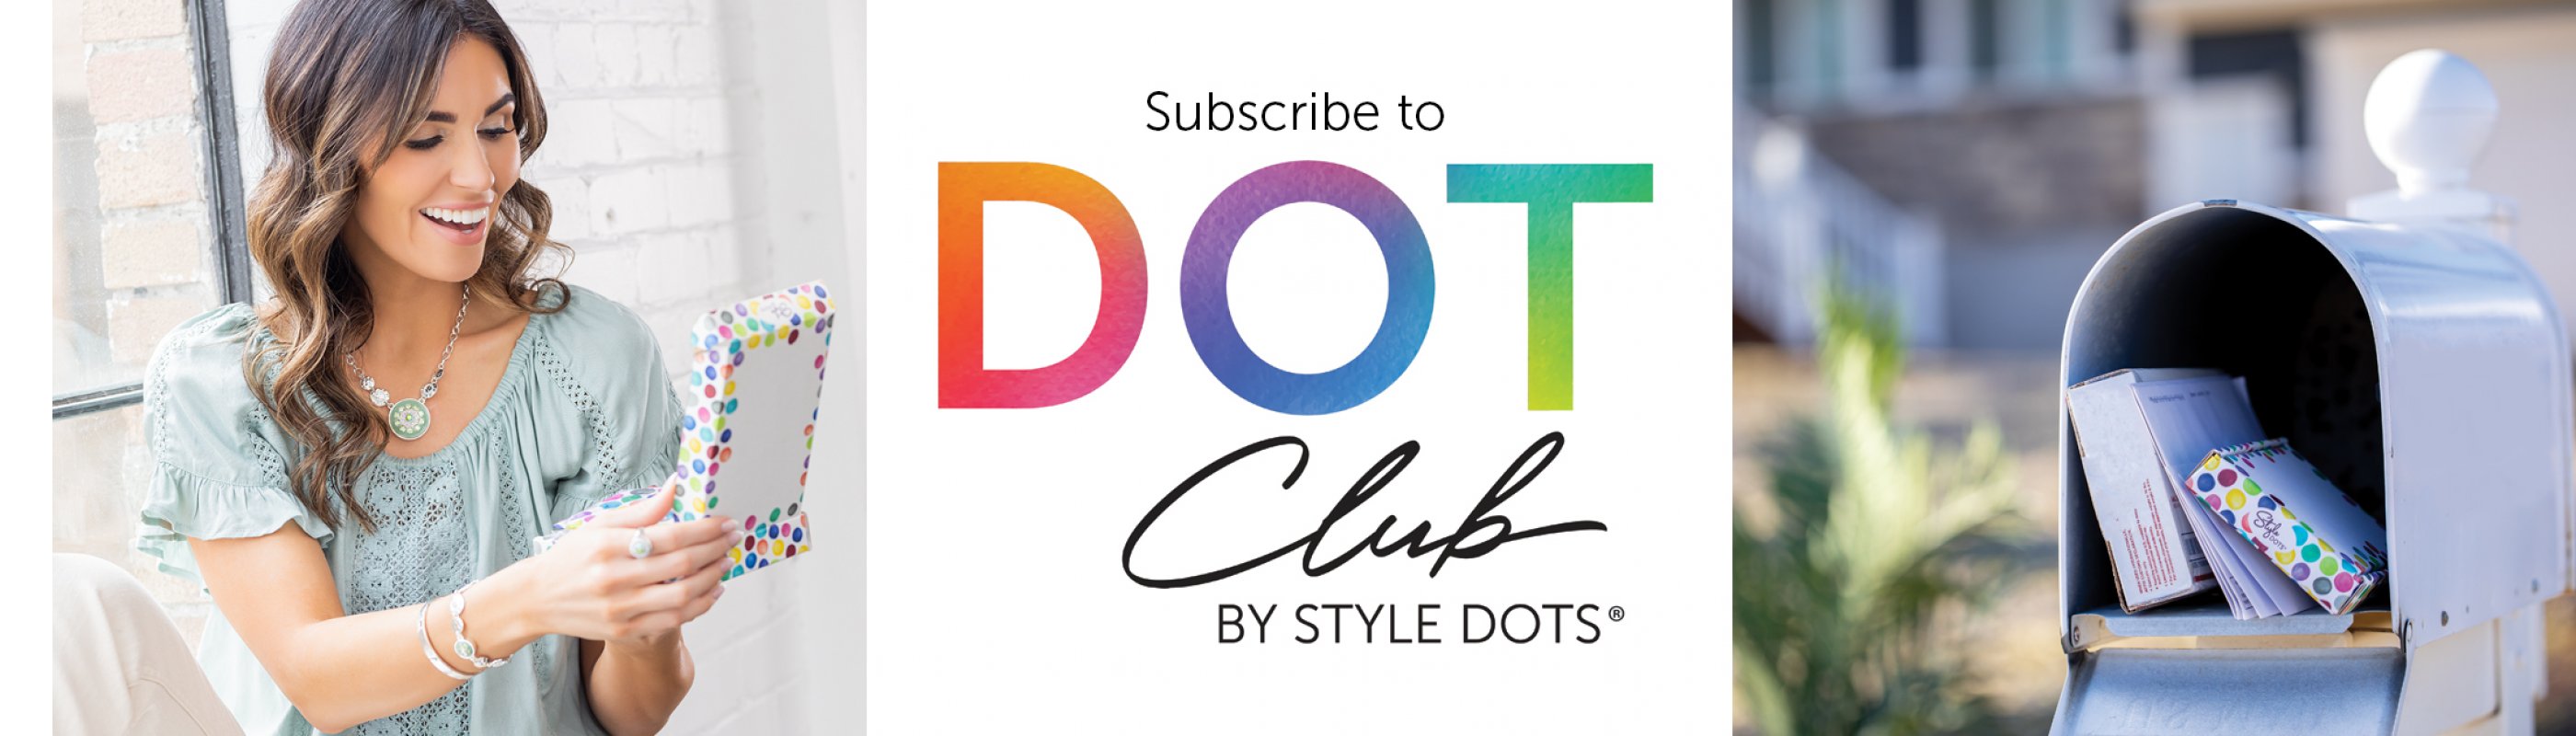 Dot Club-Your monthly jewelry subscription box